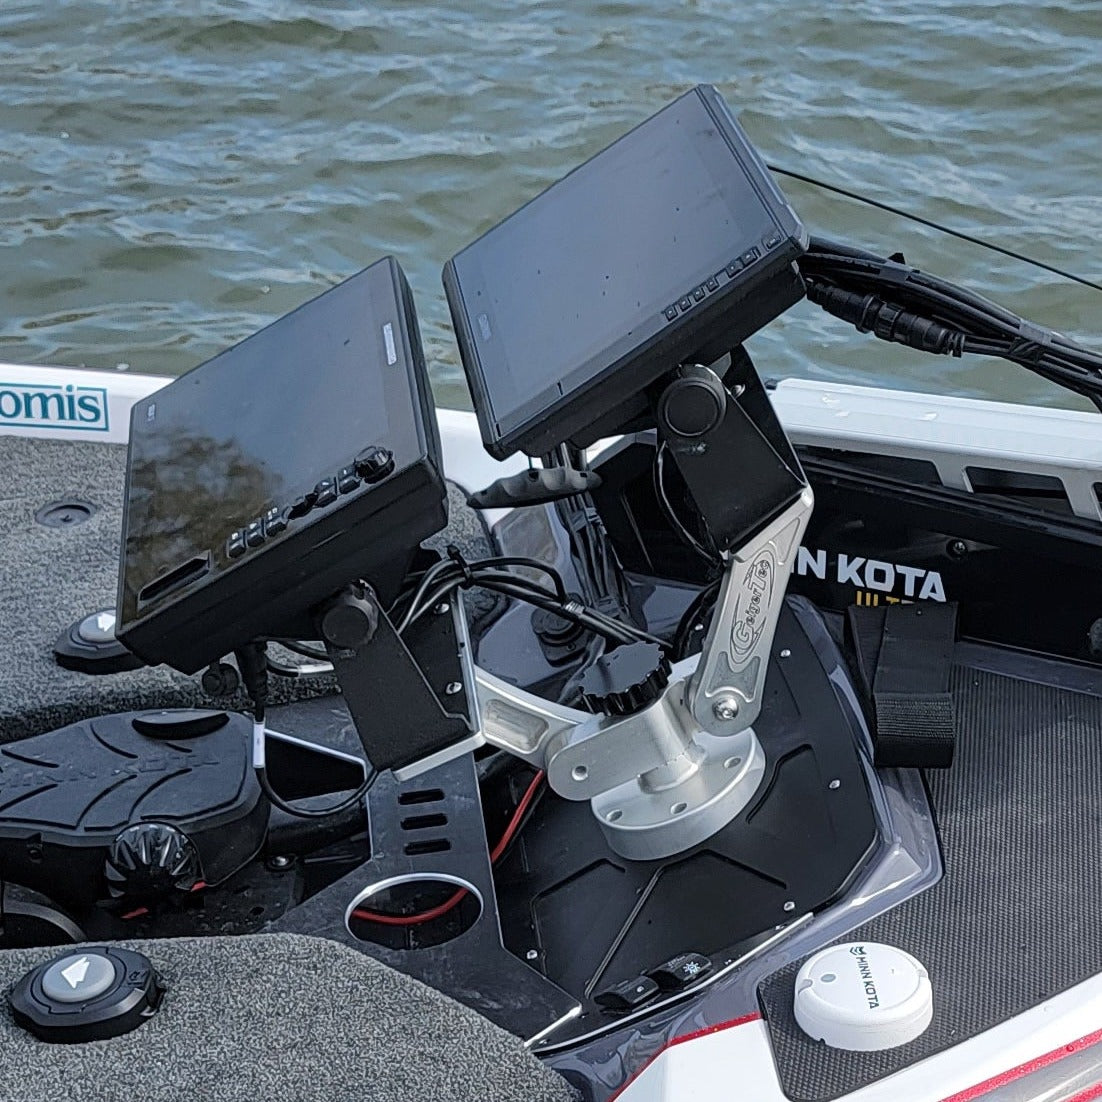  Mounts For Fish Finders